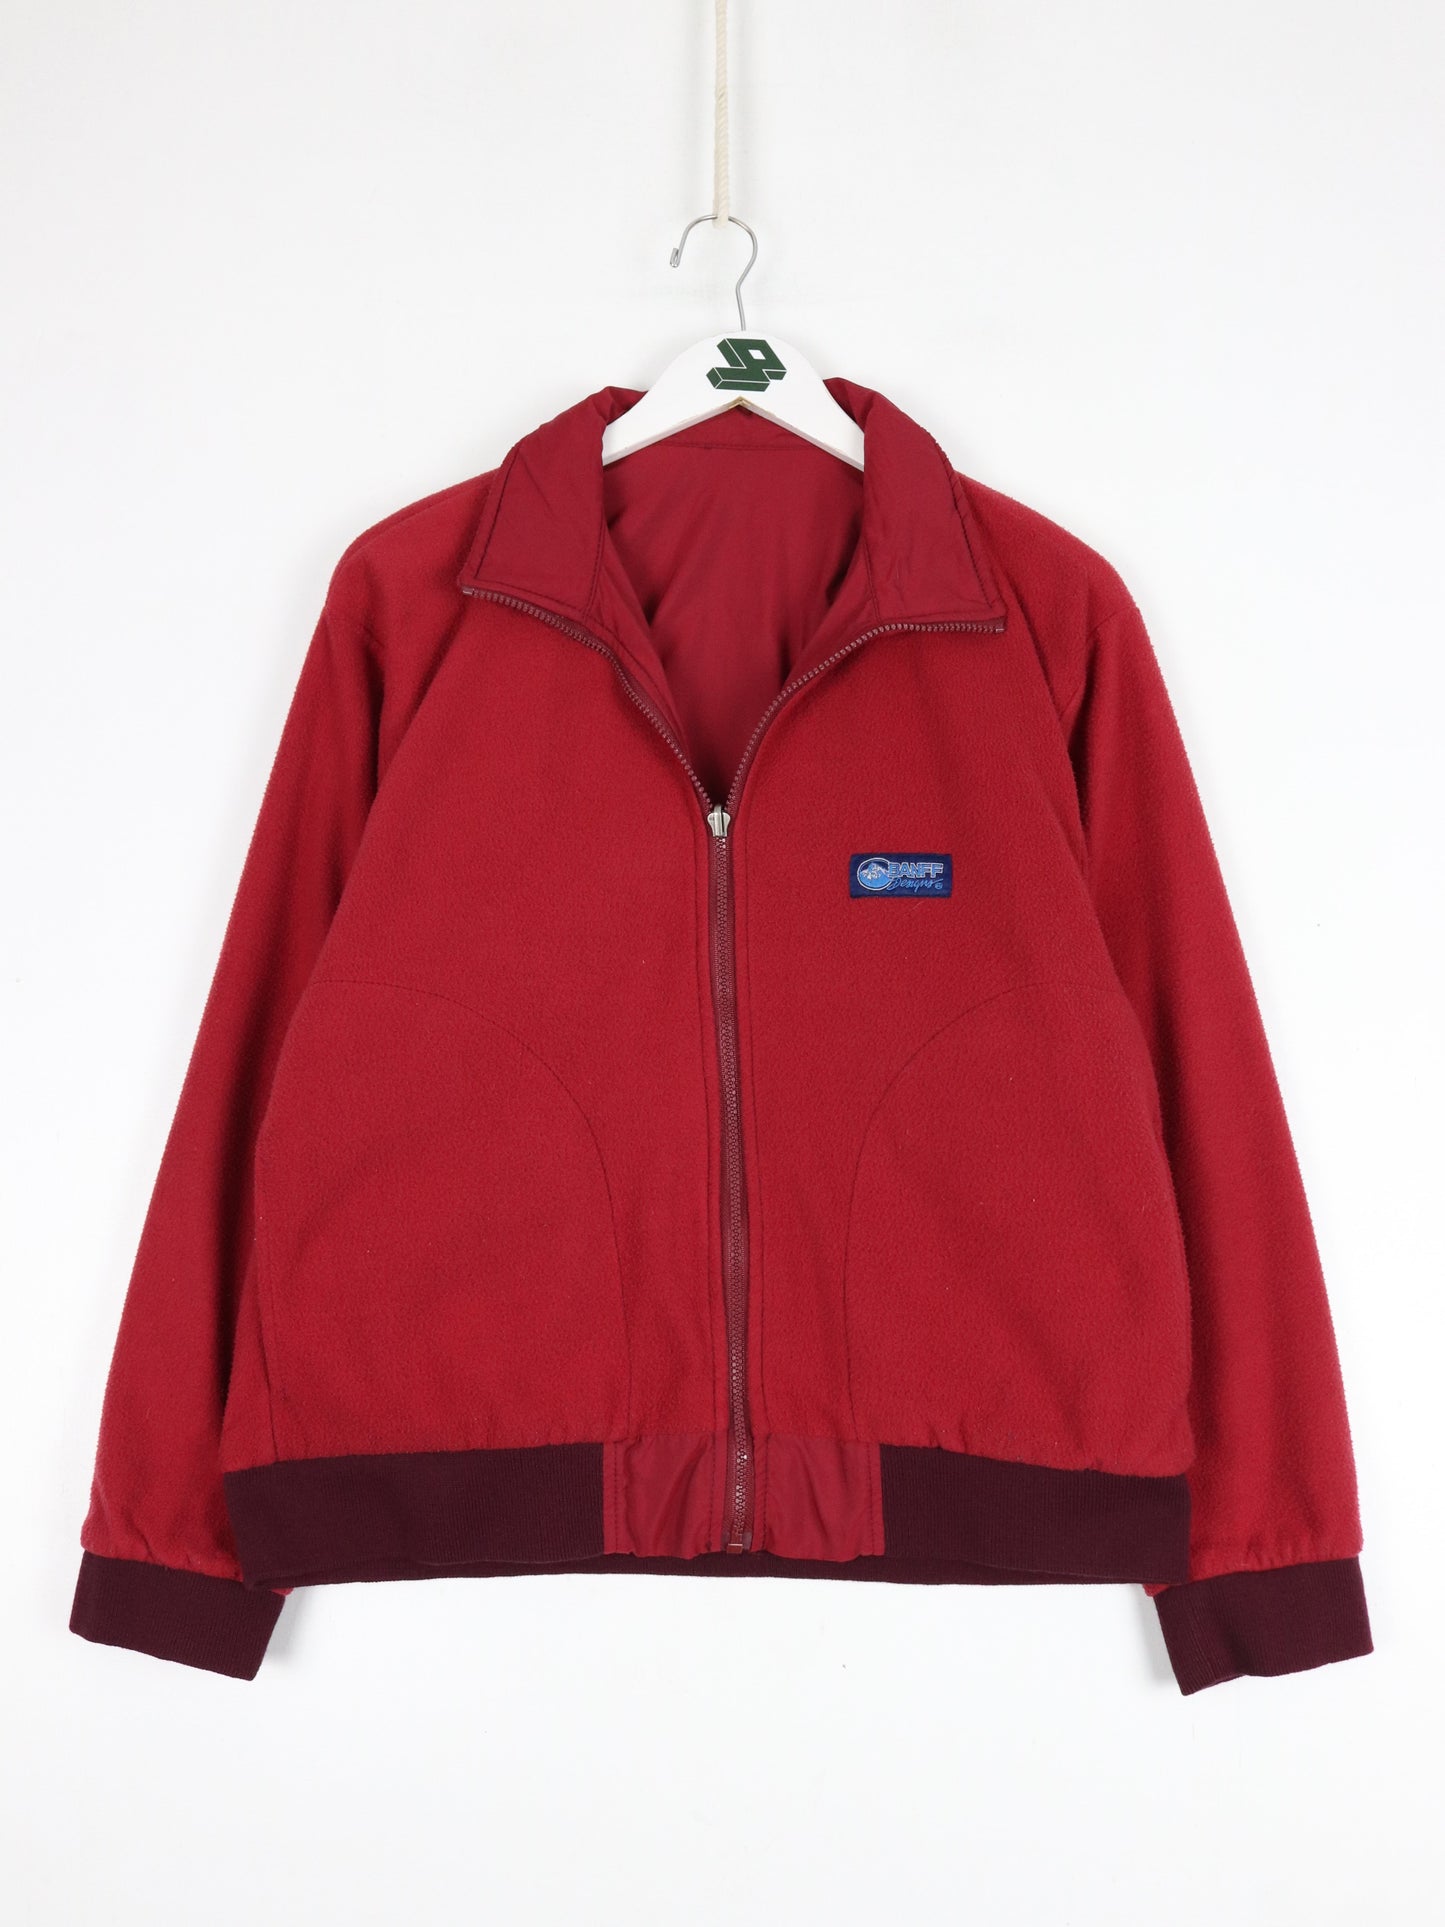 Vintage Banff Jacket Womens Small Red Reversible Fleece Outdoors